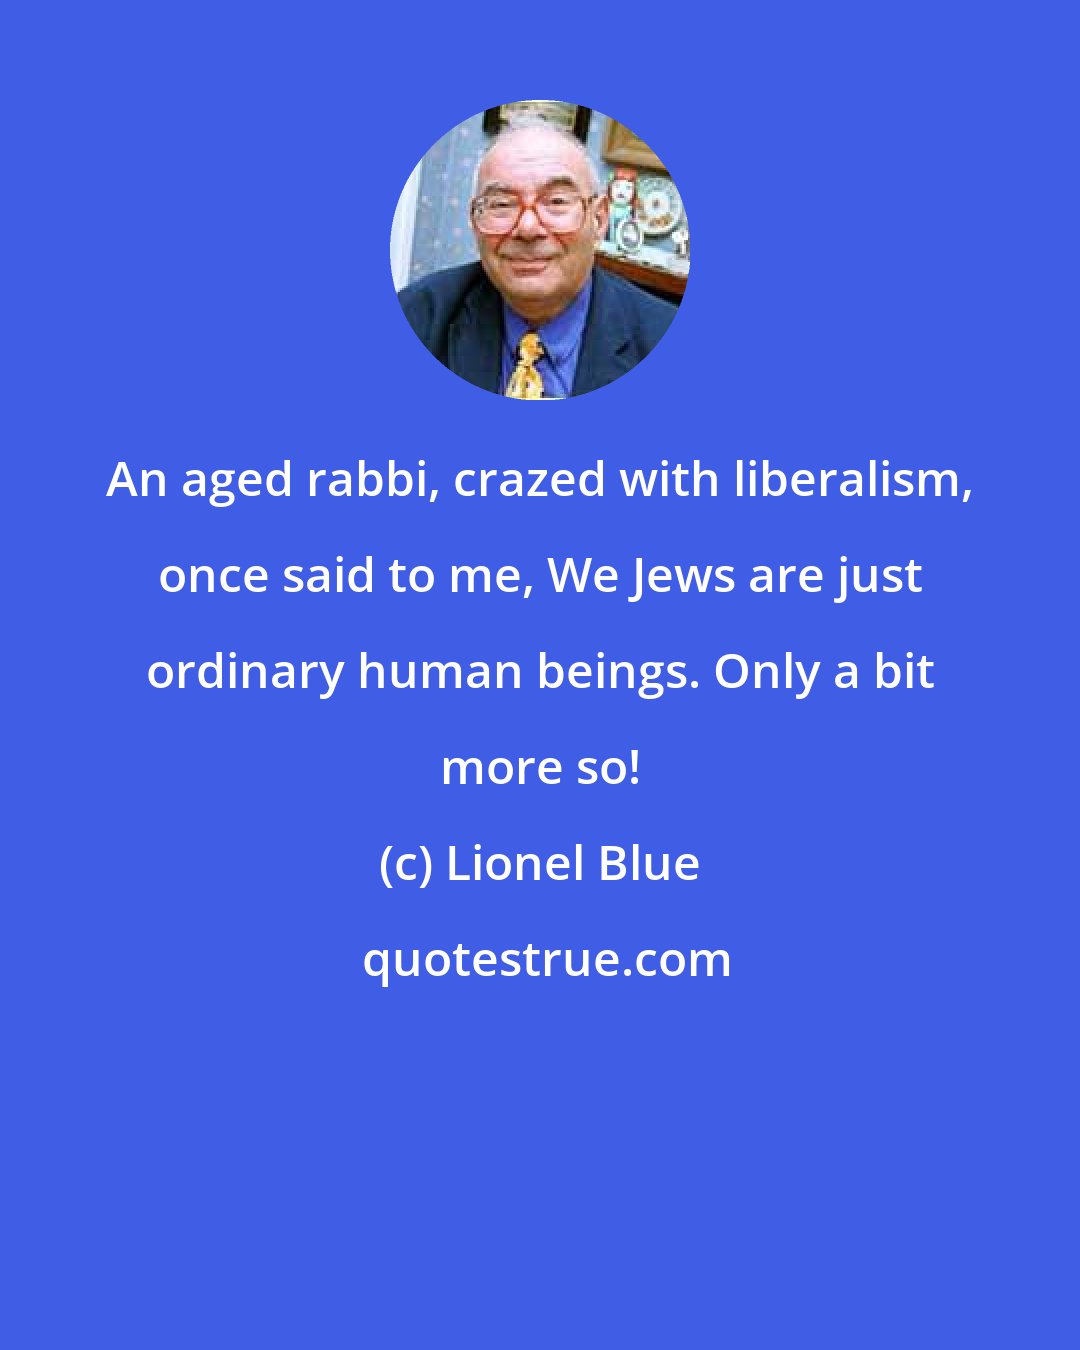 Lionel Blue: An aged rabbi, crazed with liberalism, once said to me, We Jews are just ordinary human beings. Only a bit more so!